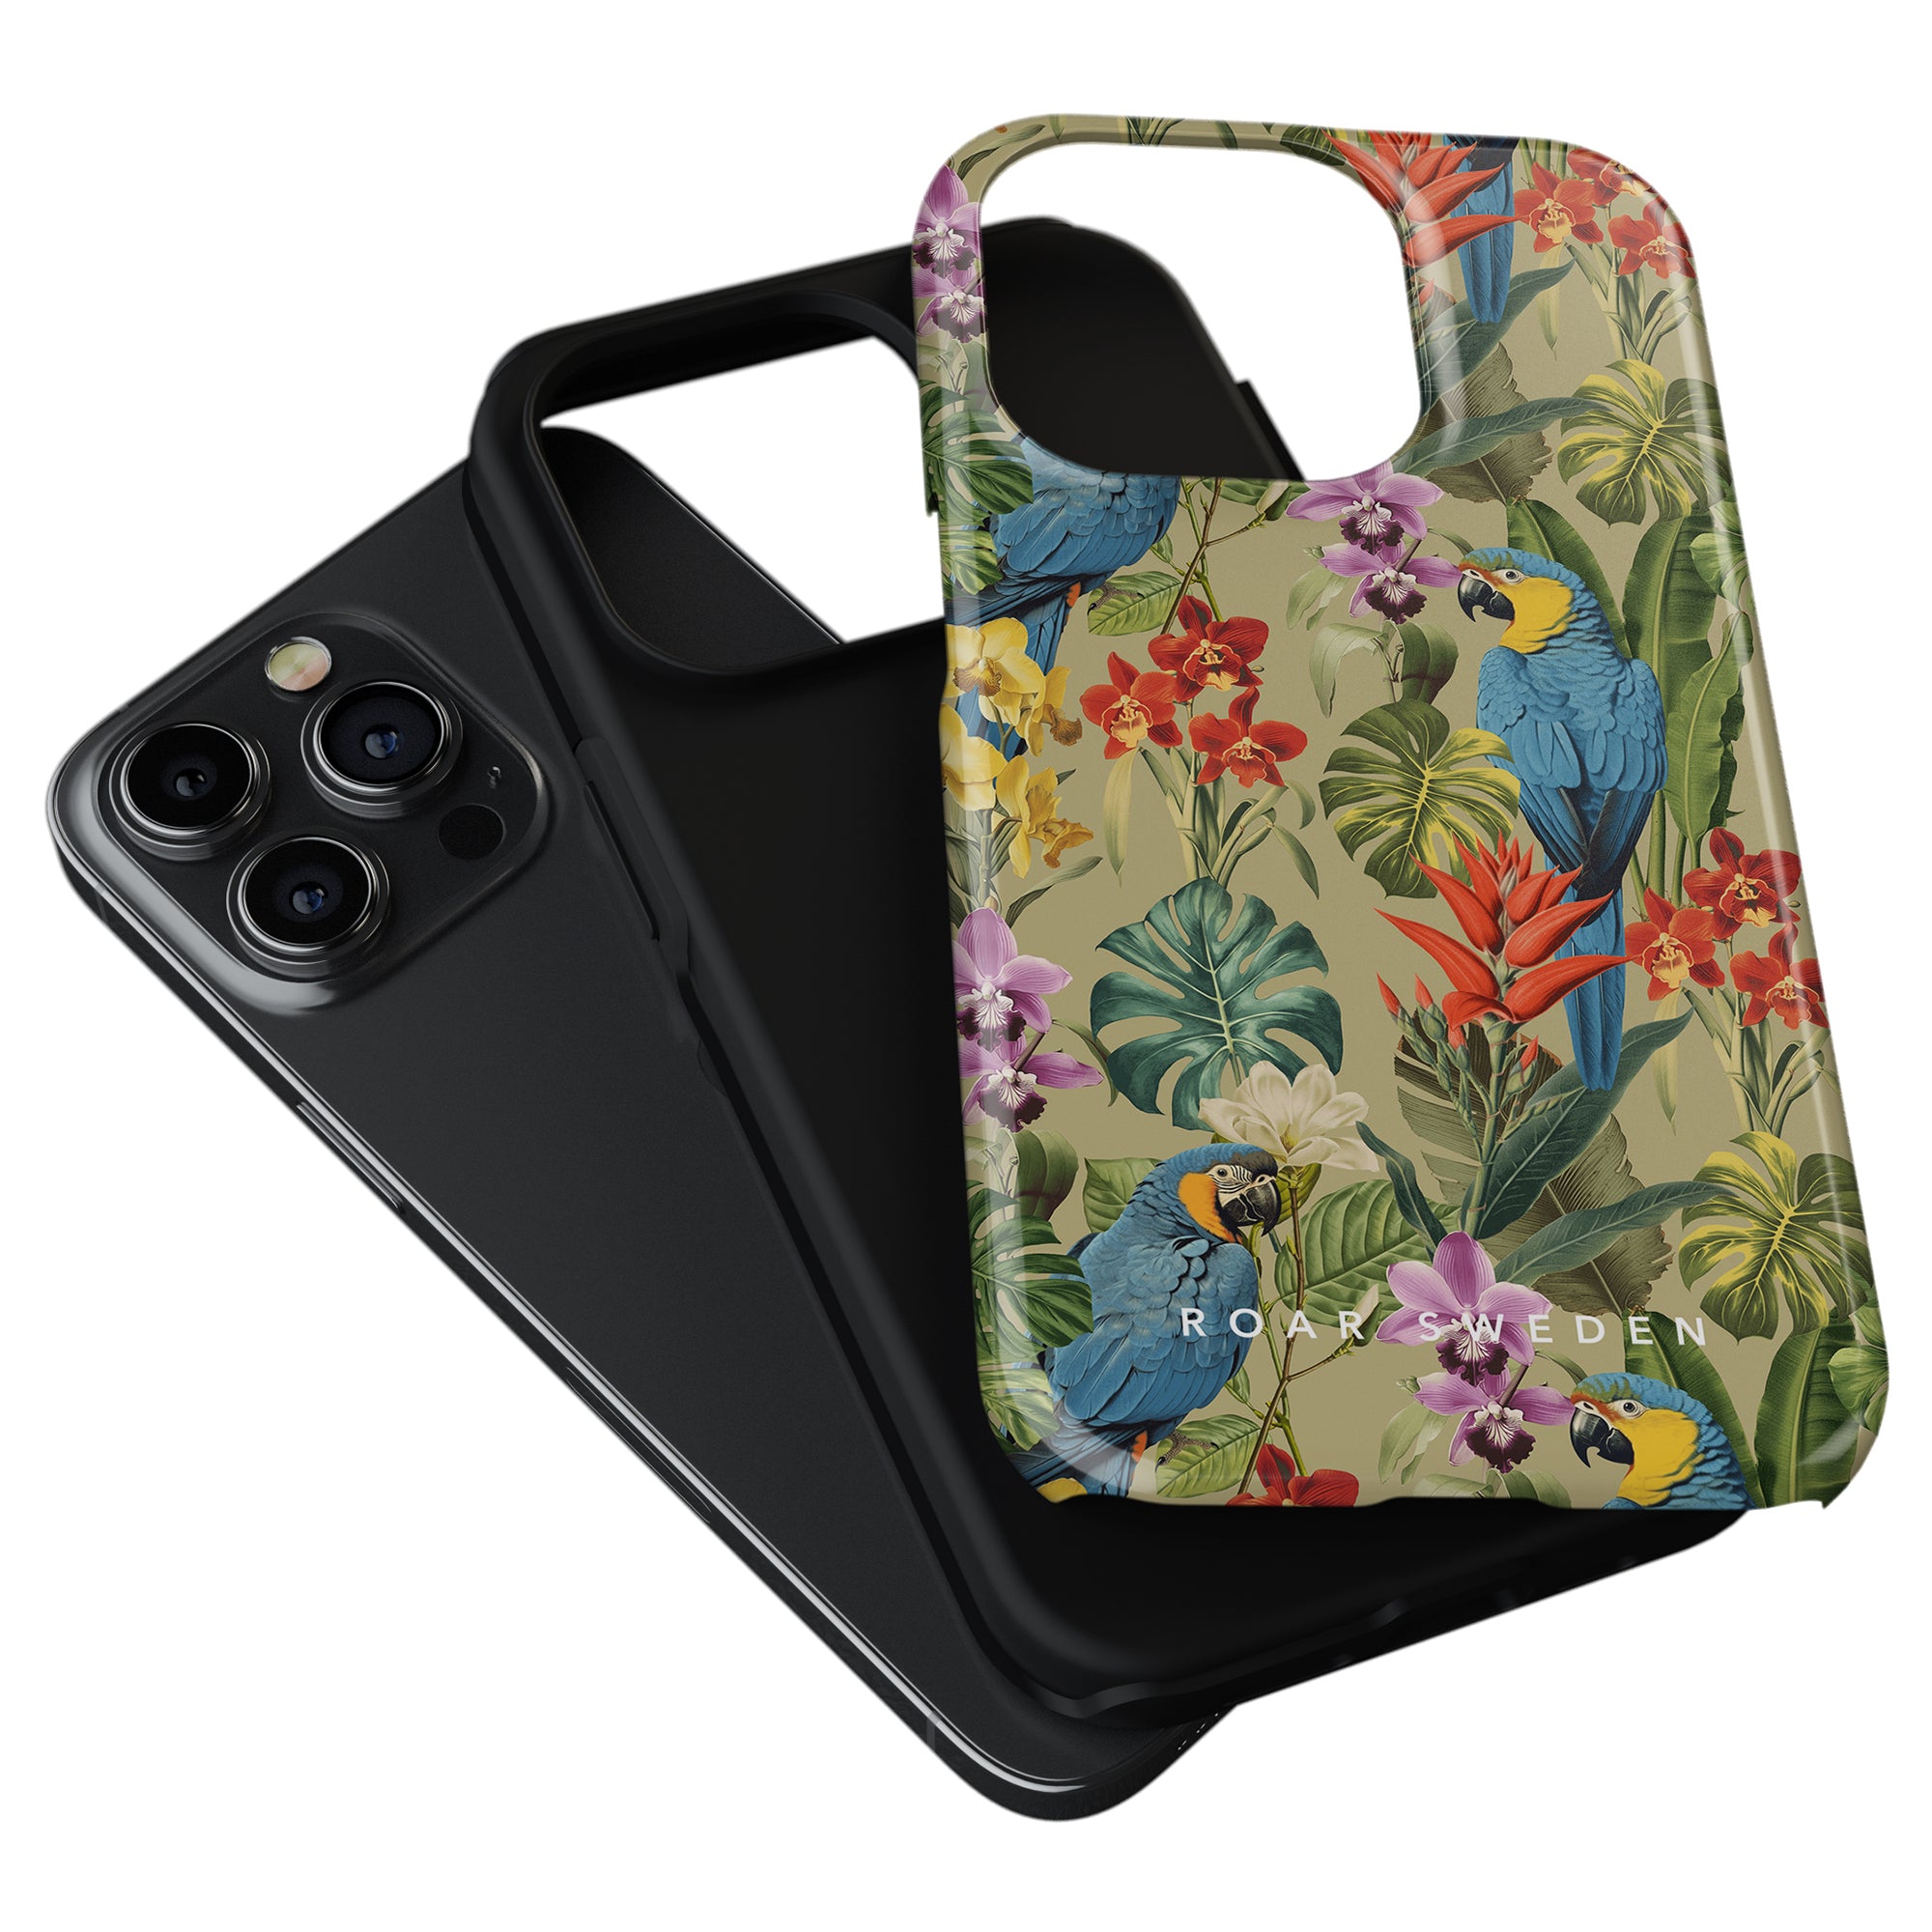 Two phone cases, one black and the other Verdant Beauty - Tough Case showcasing a colorful parrot and floral design, overlapping each other.